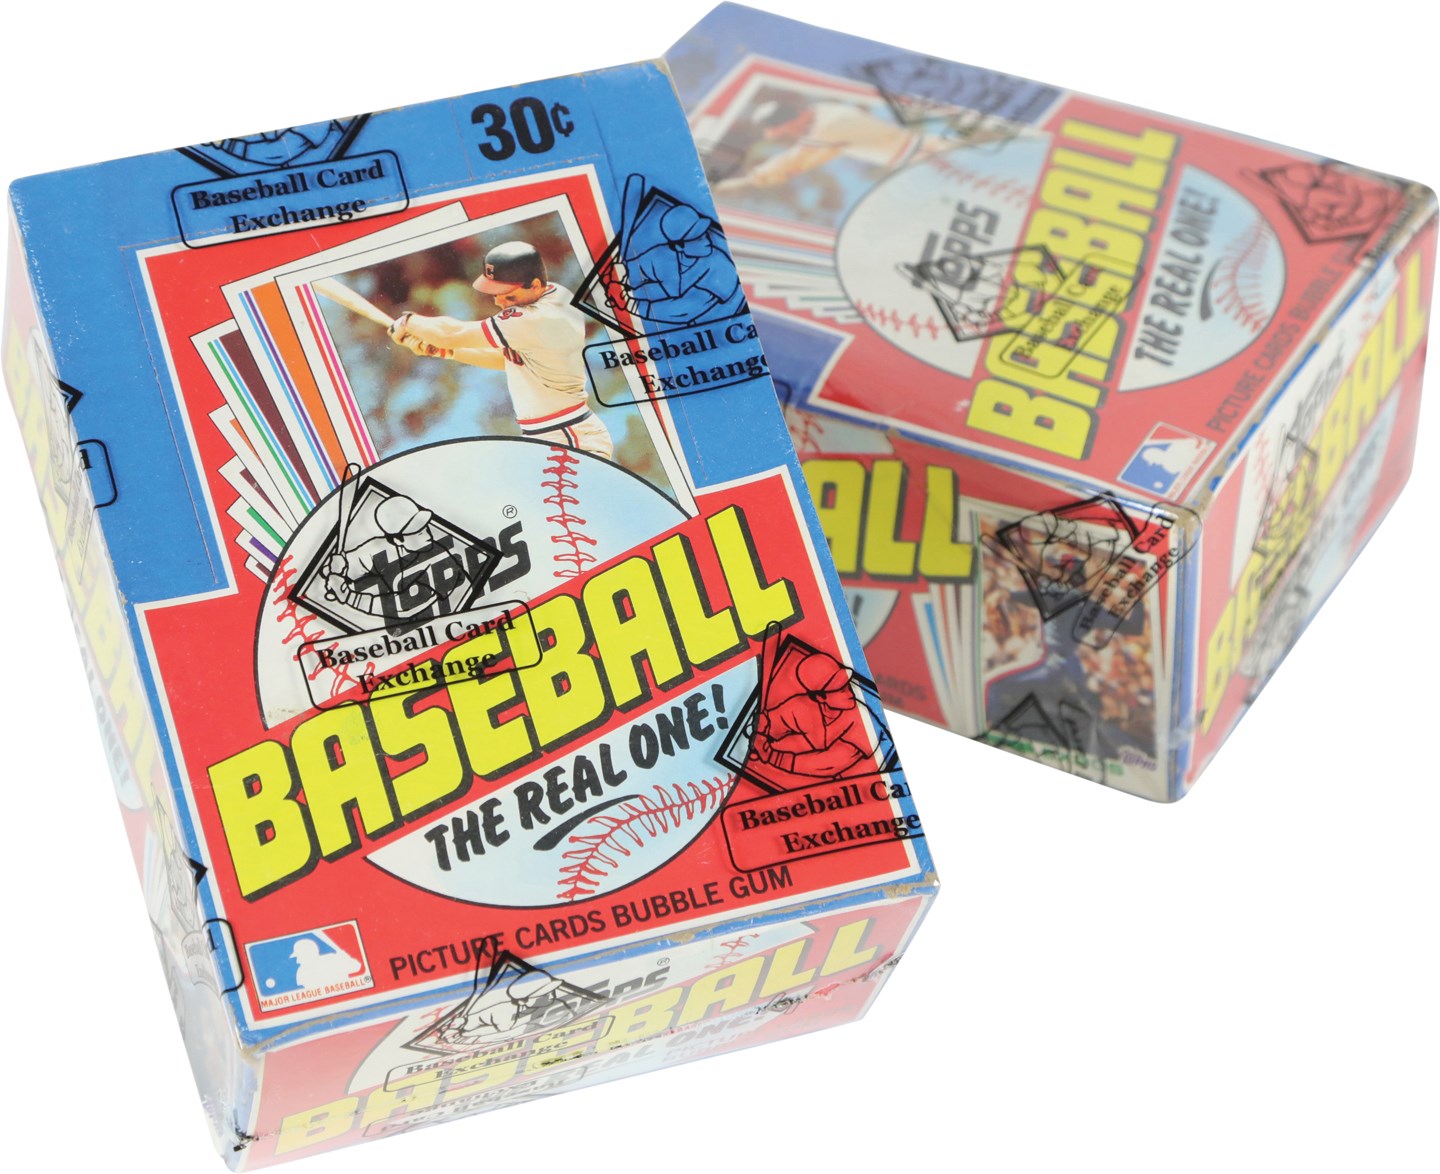 Unopened Boxes, Packs And Cases - Two 1982 Topps Baseball Unopened Wax Boxes (BBCE)